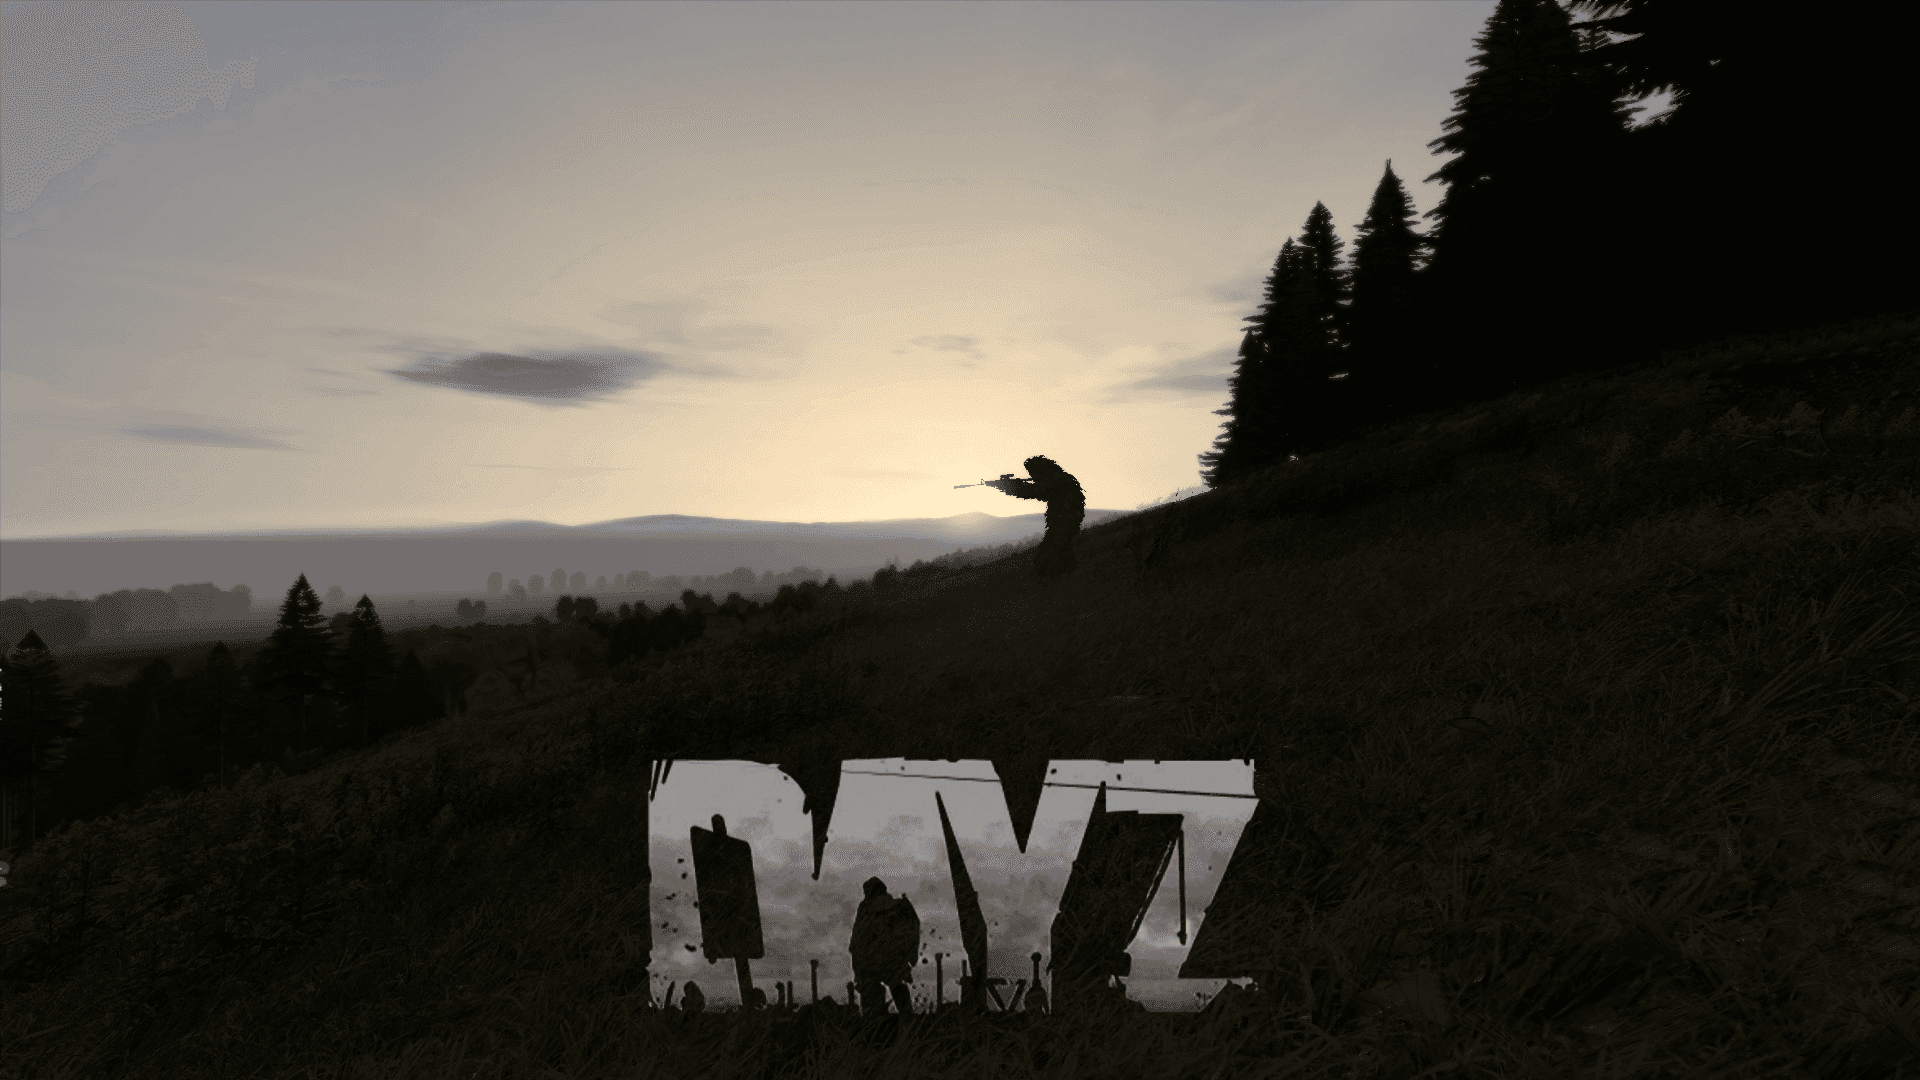 A Man Is Standing On A Hill With The Words Dayz On It